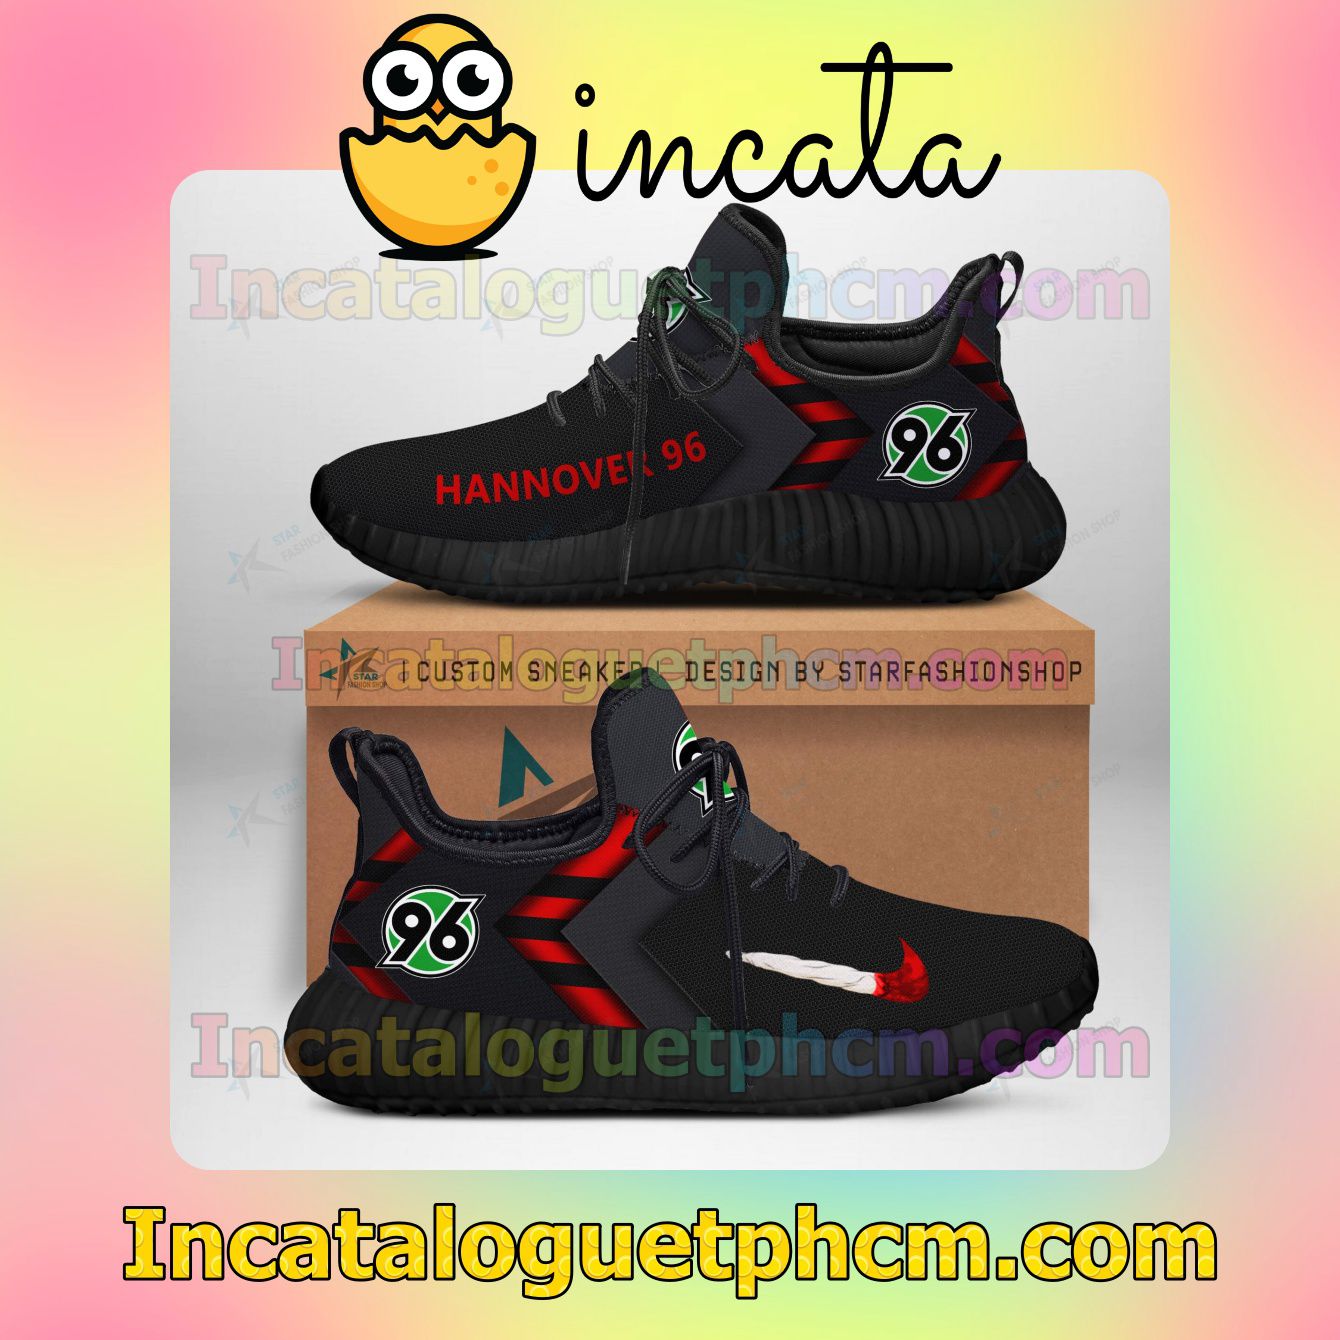 Hannover 96 Ultraboost Yeezy Shoes Sneakers